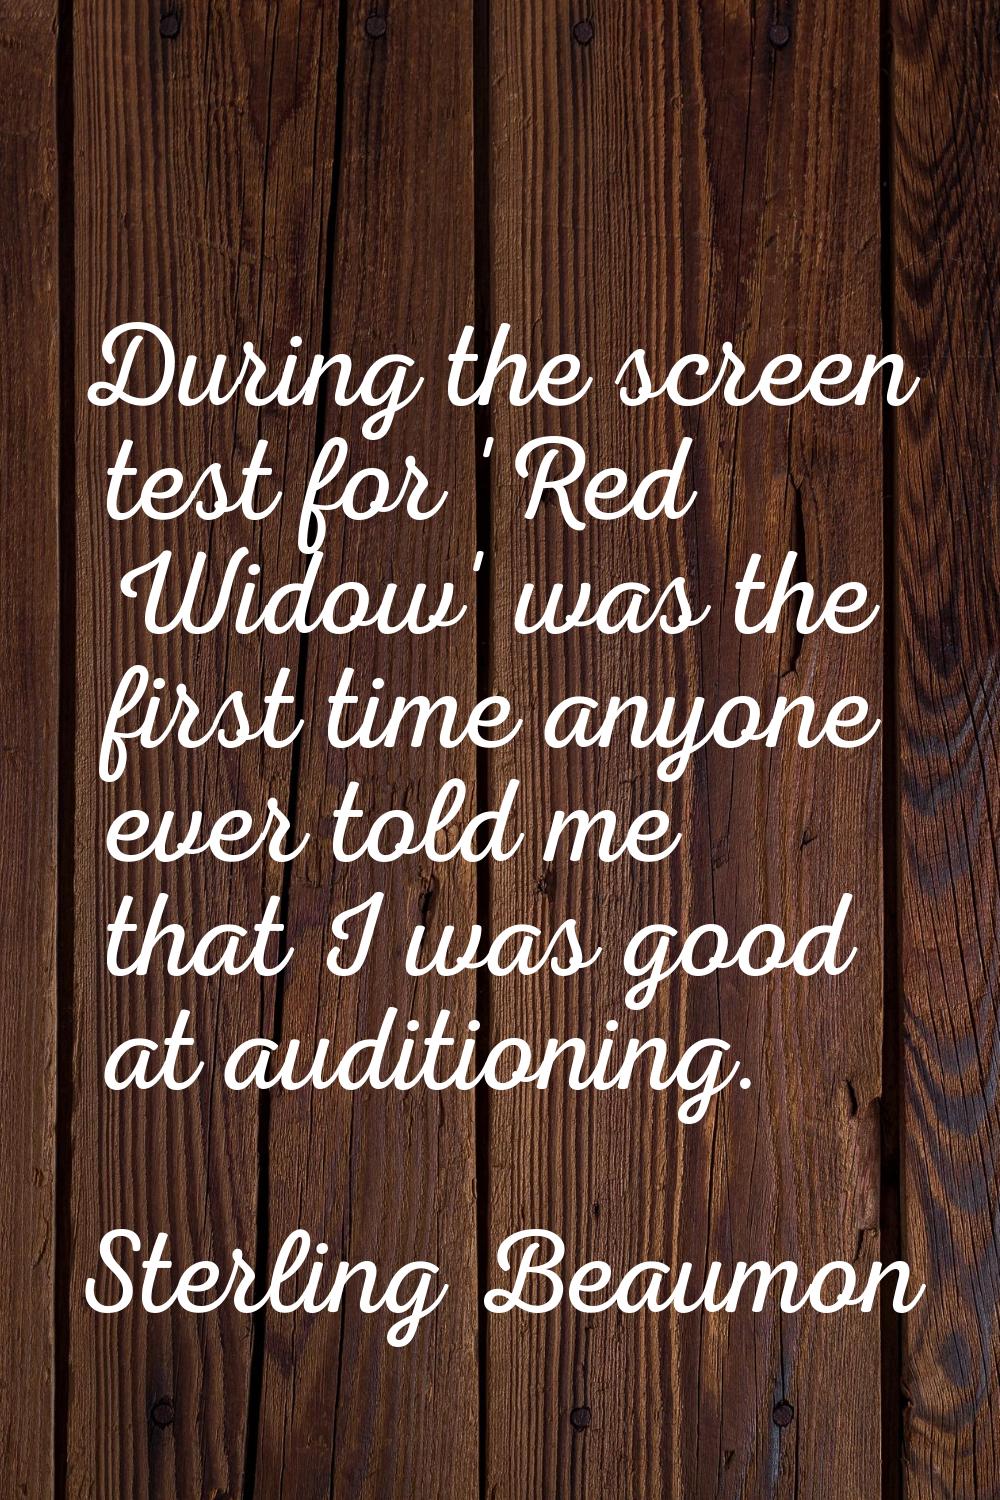 During the screen test for 'Red Widow' was the first time anyone ever told me that I was good at au